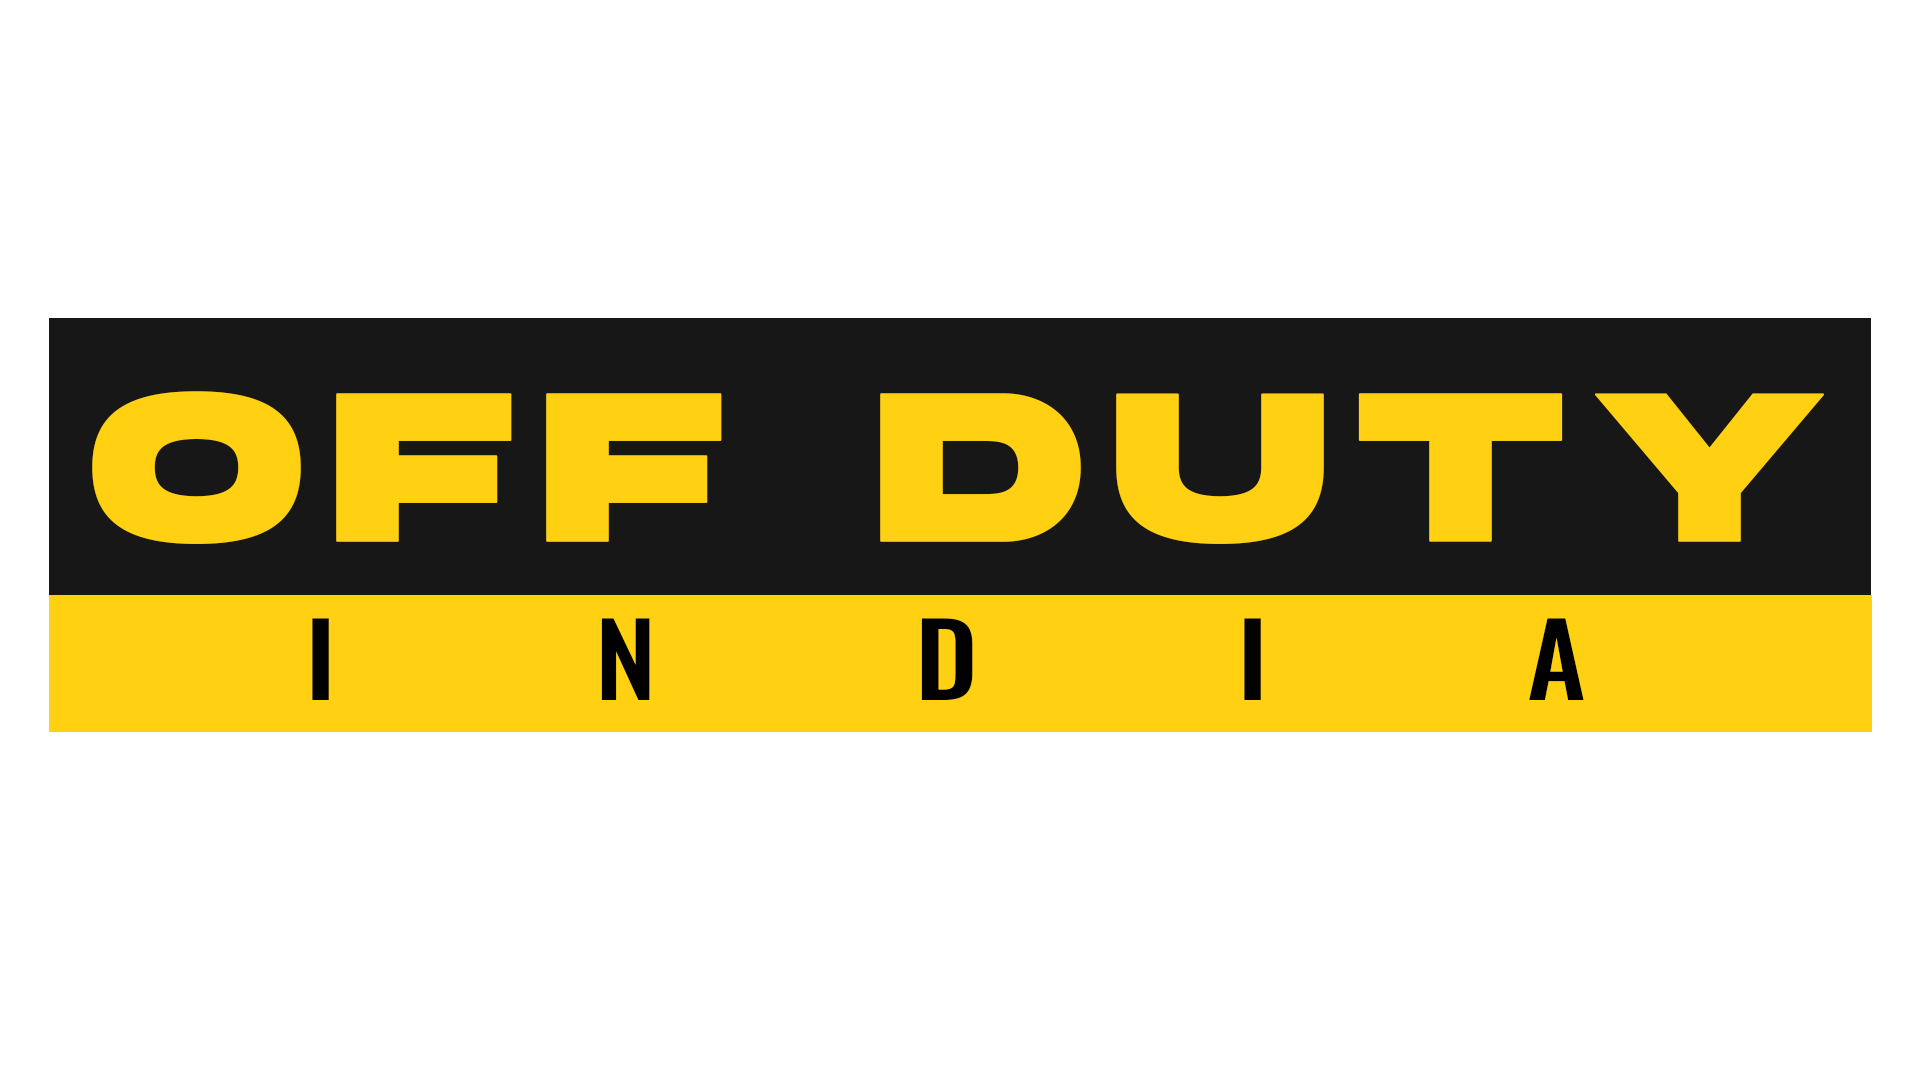 The Off Duty Brand